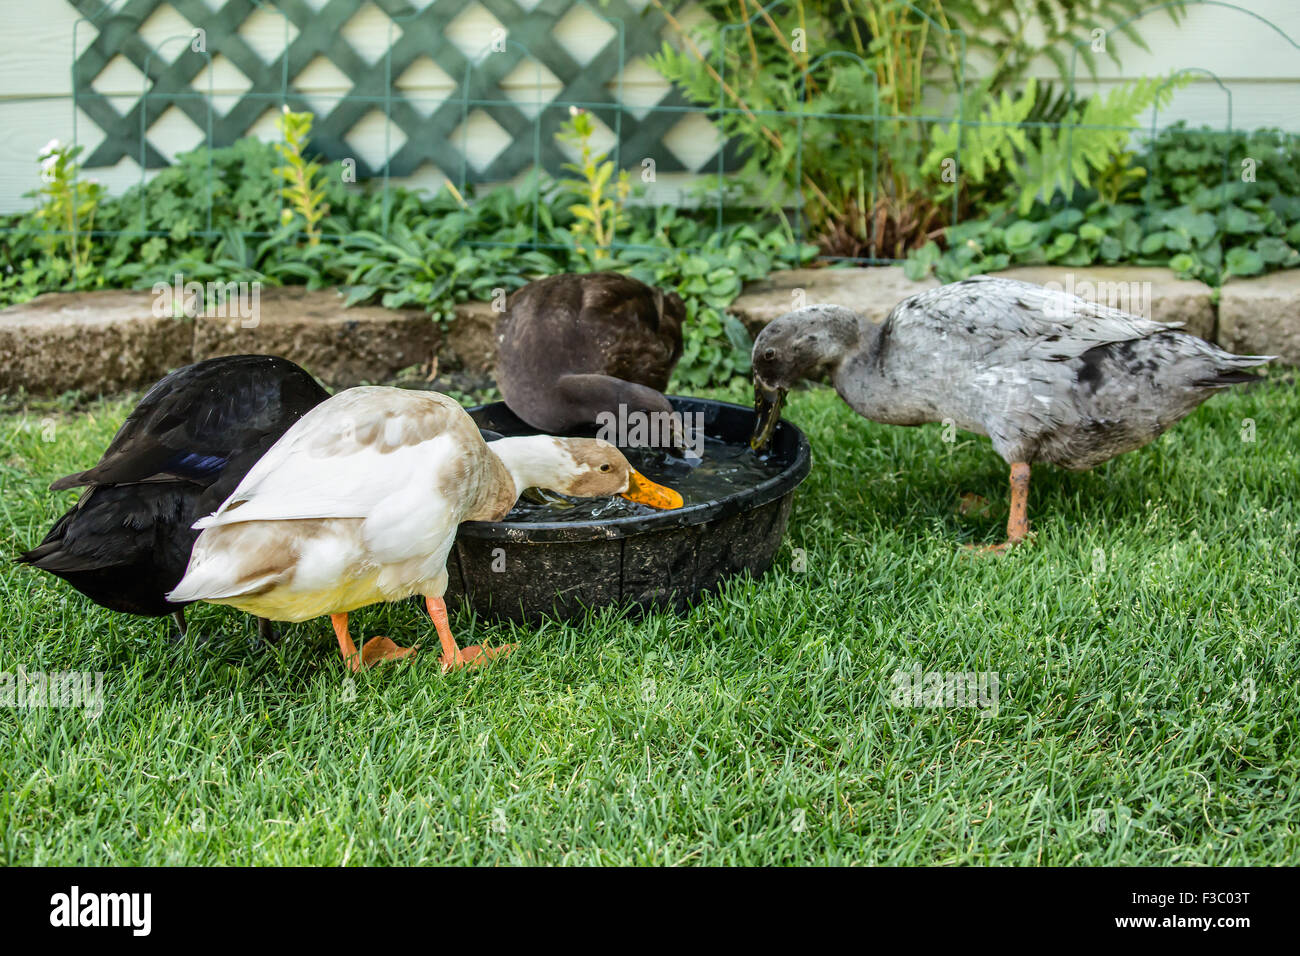 Four types of Indian Runner ducks (Anas platyrhynchos domesticus): White and Fawn, black, chocolate and blue.  They are an unusu Stock Photo